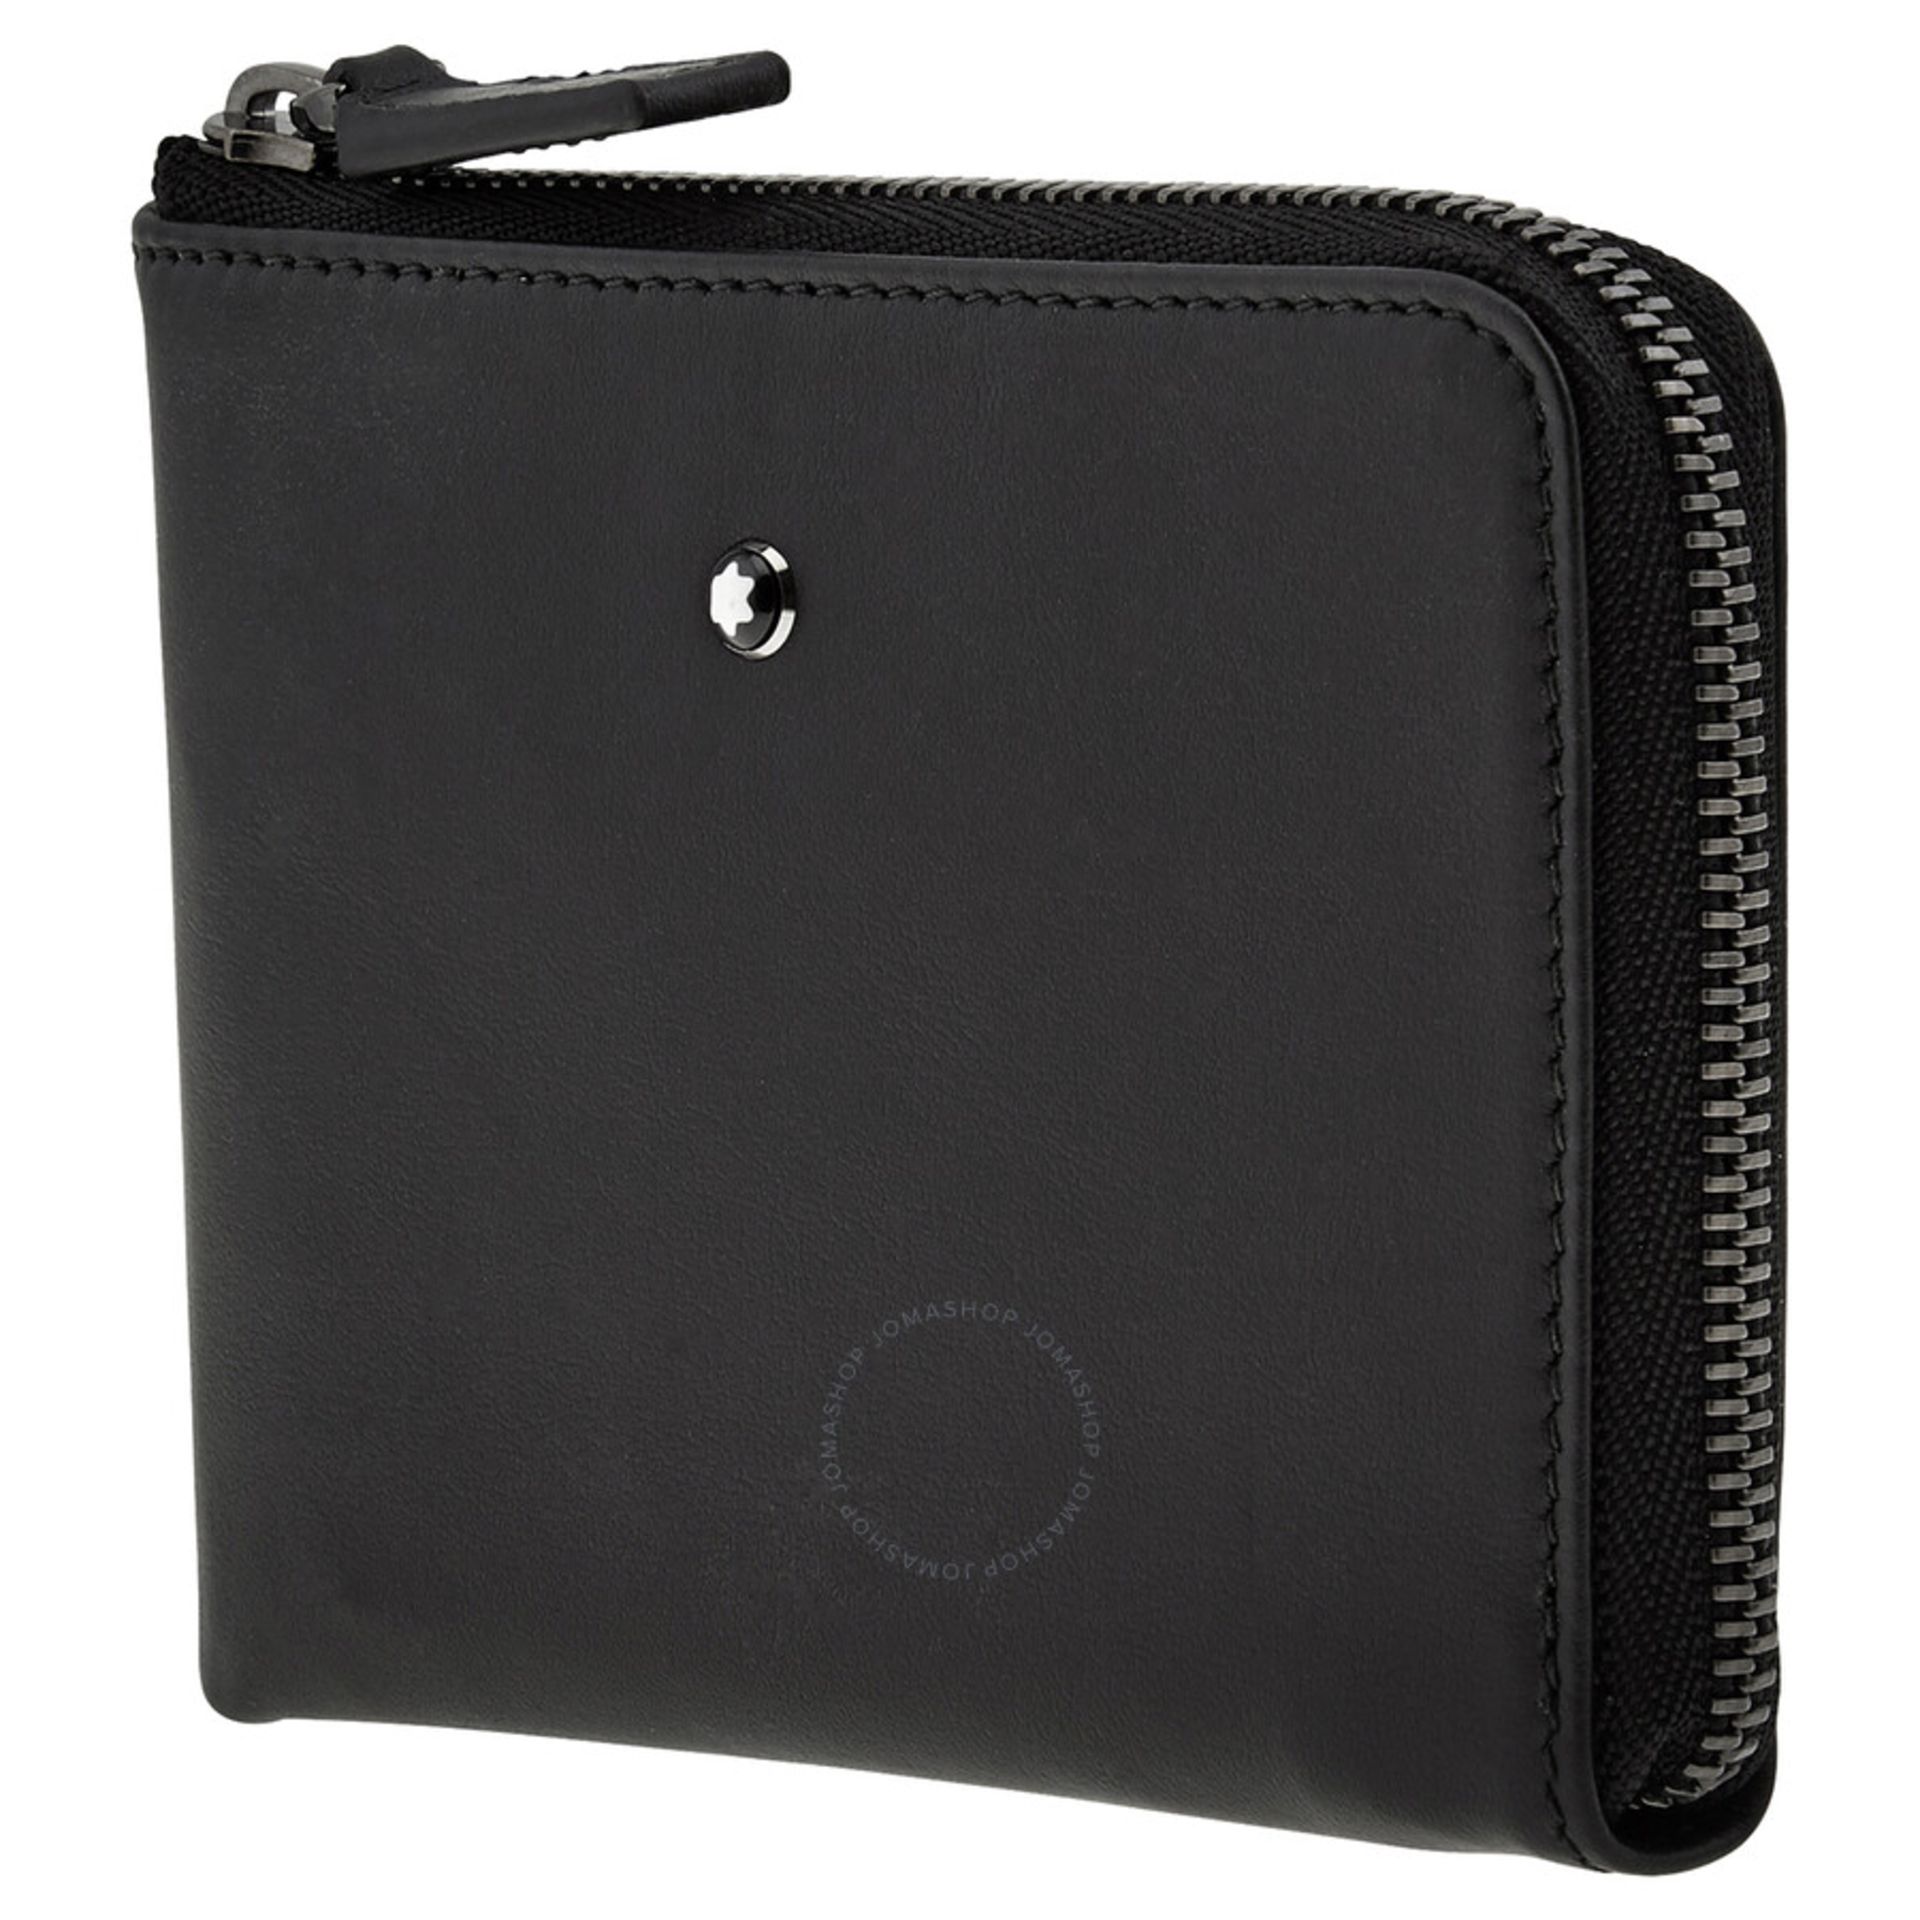 BRAND NEW Montblanc Nightflight Men's Small Black Leather Business Card Holder RRP £175 - Image 2 of 2